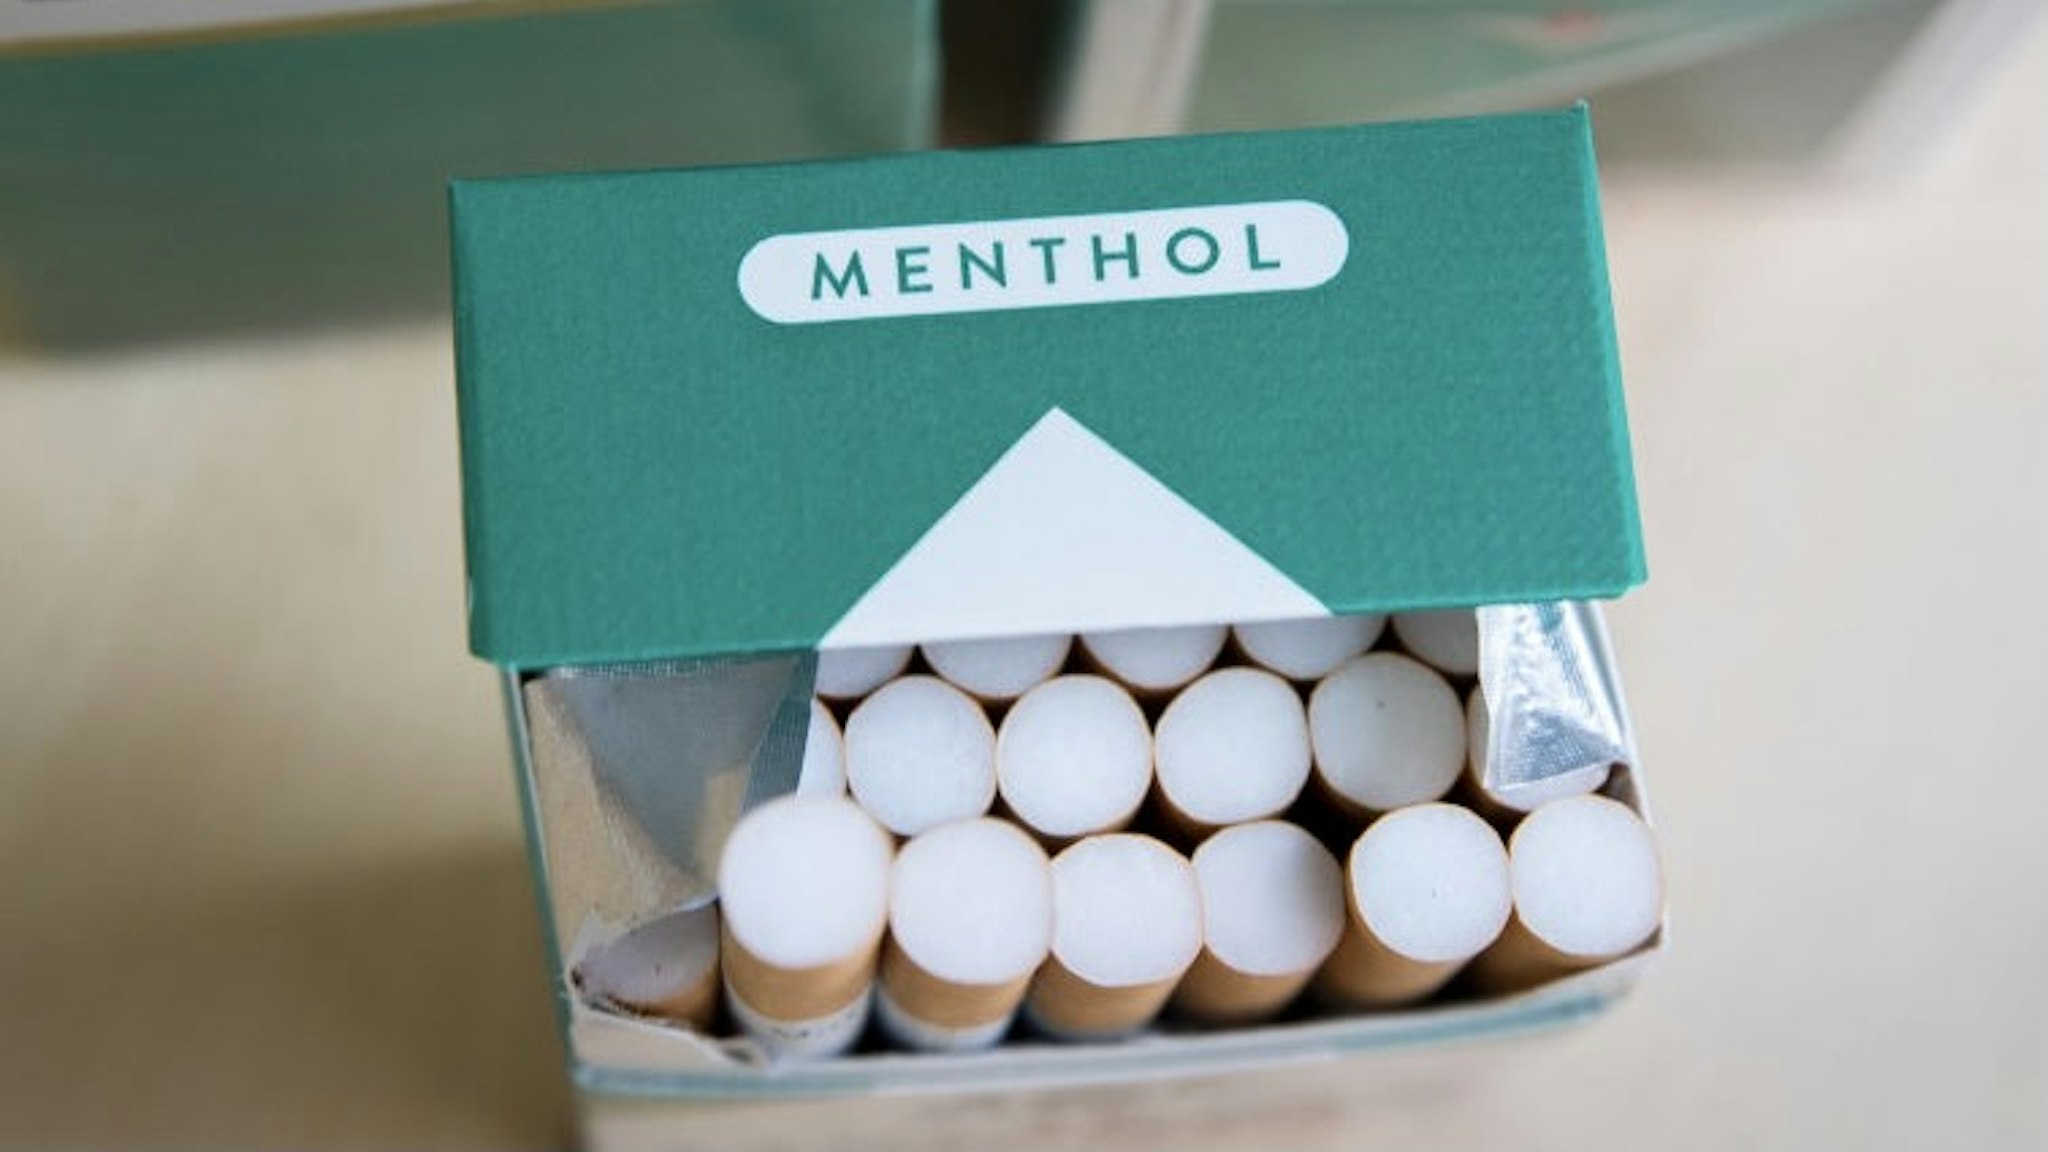 FDA Moves To Ban Menthol Cigarettes And Flavored Cigars NEW YORK, NEW YORK - NOVEMBER 15: In this photo illustration, packs of menthol cigarettes sits on a table, November 15, 2018 in New York City. The U.S.Food and Drug Administration is proposing a ban on the sale of menthol cigarettes and flavored cigars. Menthol cigarettes make up 35 percent of U.S. cigarette sales. (Photo Illustration by Drew Angerer/Getty Images)